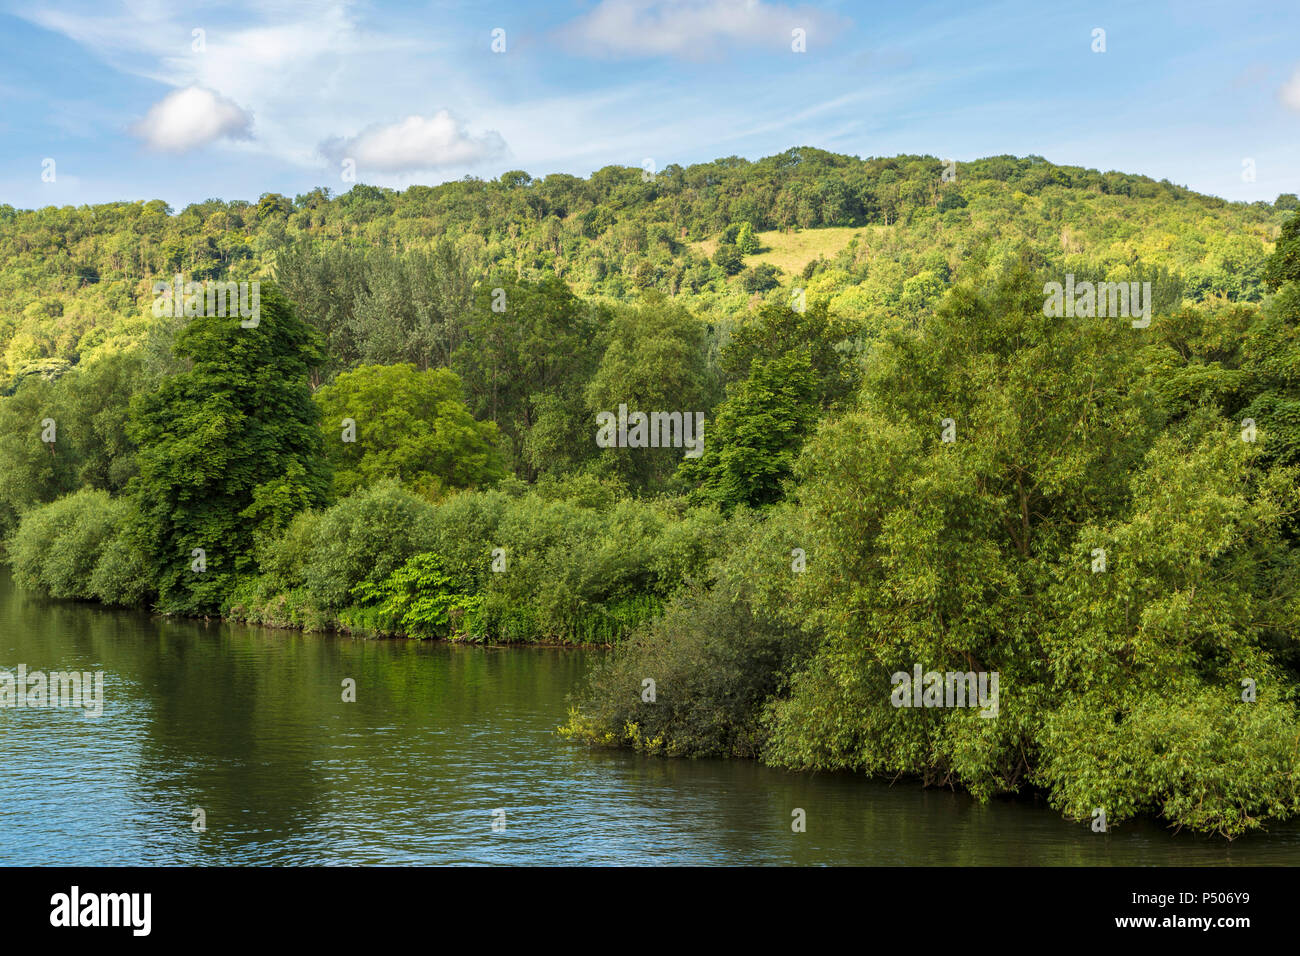 River Thames with view of a gorge known as the 'Goring Gap' and the steep slopes of the Chiltern Hills, at Goring, Oxfordshire, England, UK. Stock Photo